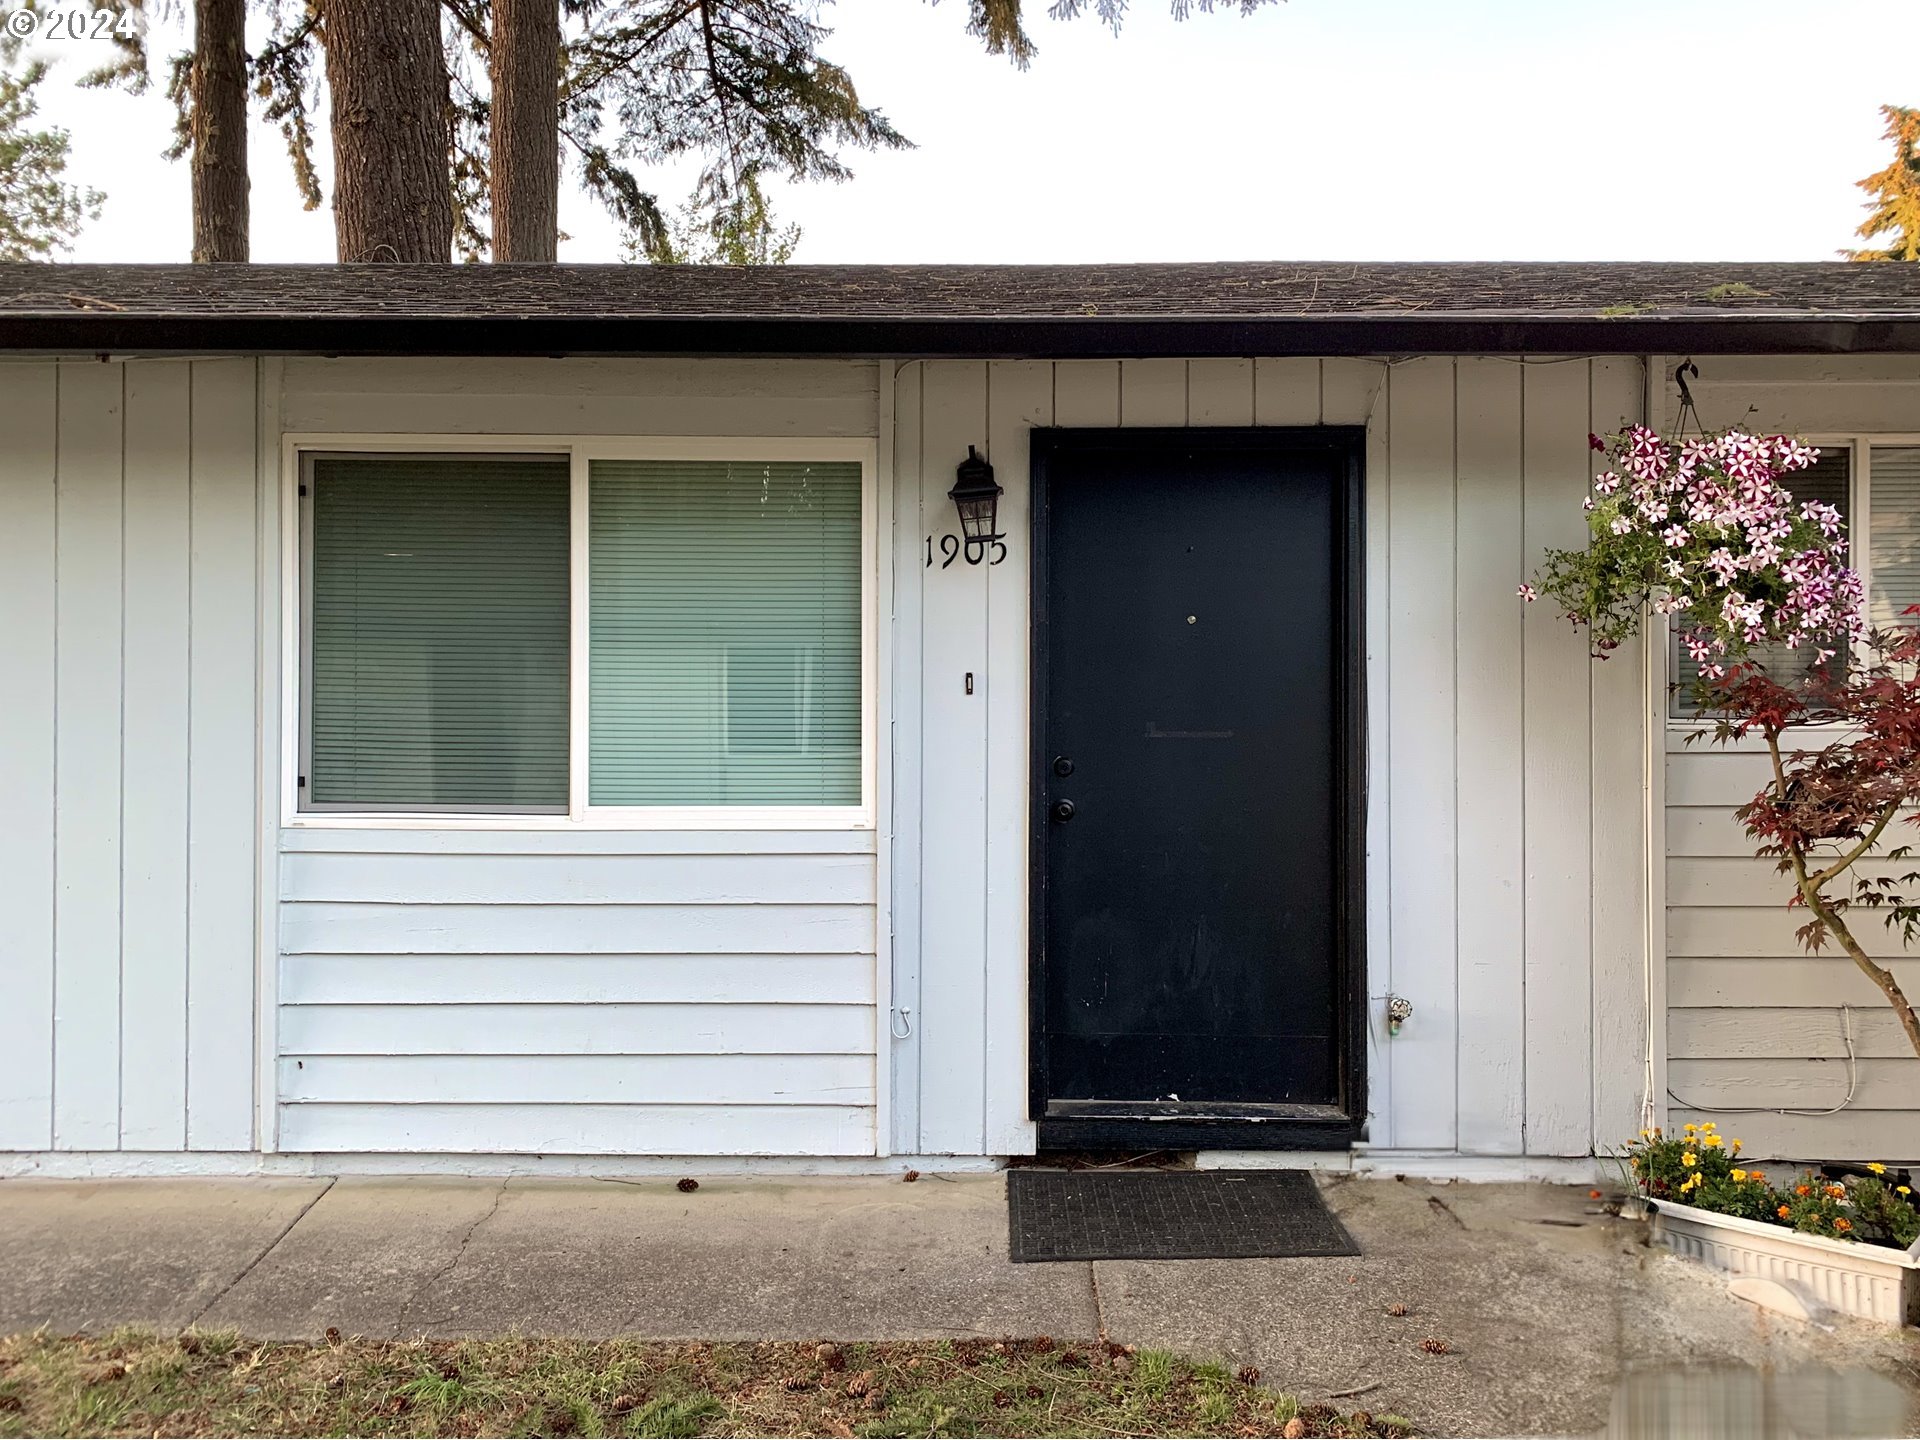 1905 Norris Rd, Vancouver, Washington, 98661, United States, ,Residential,For Sale,1905 Norris Rd,1506540